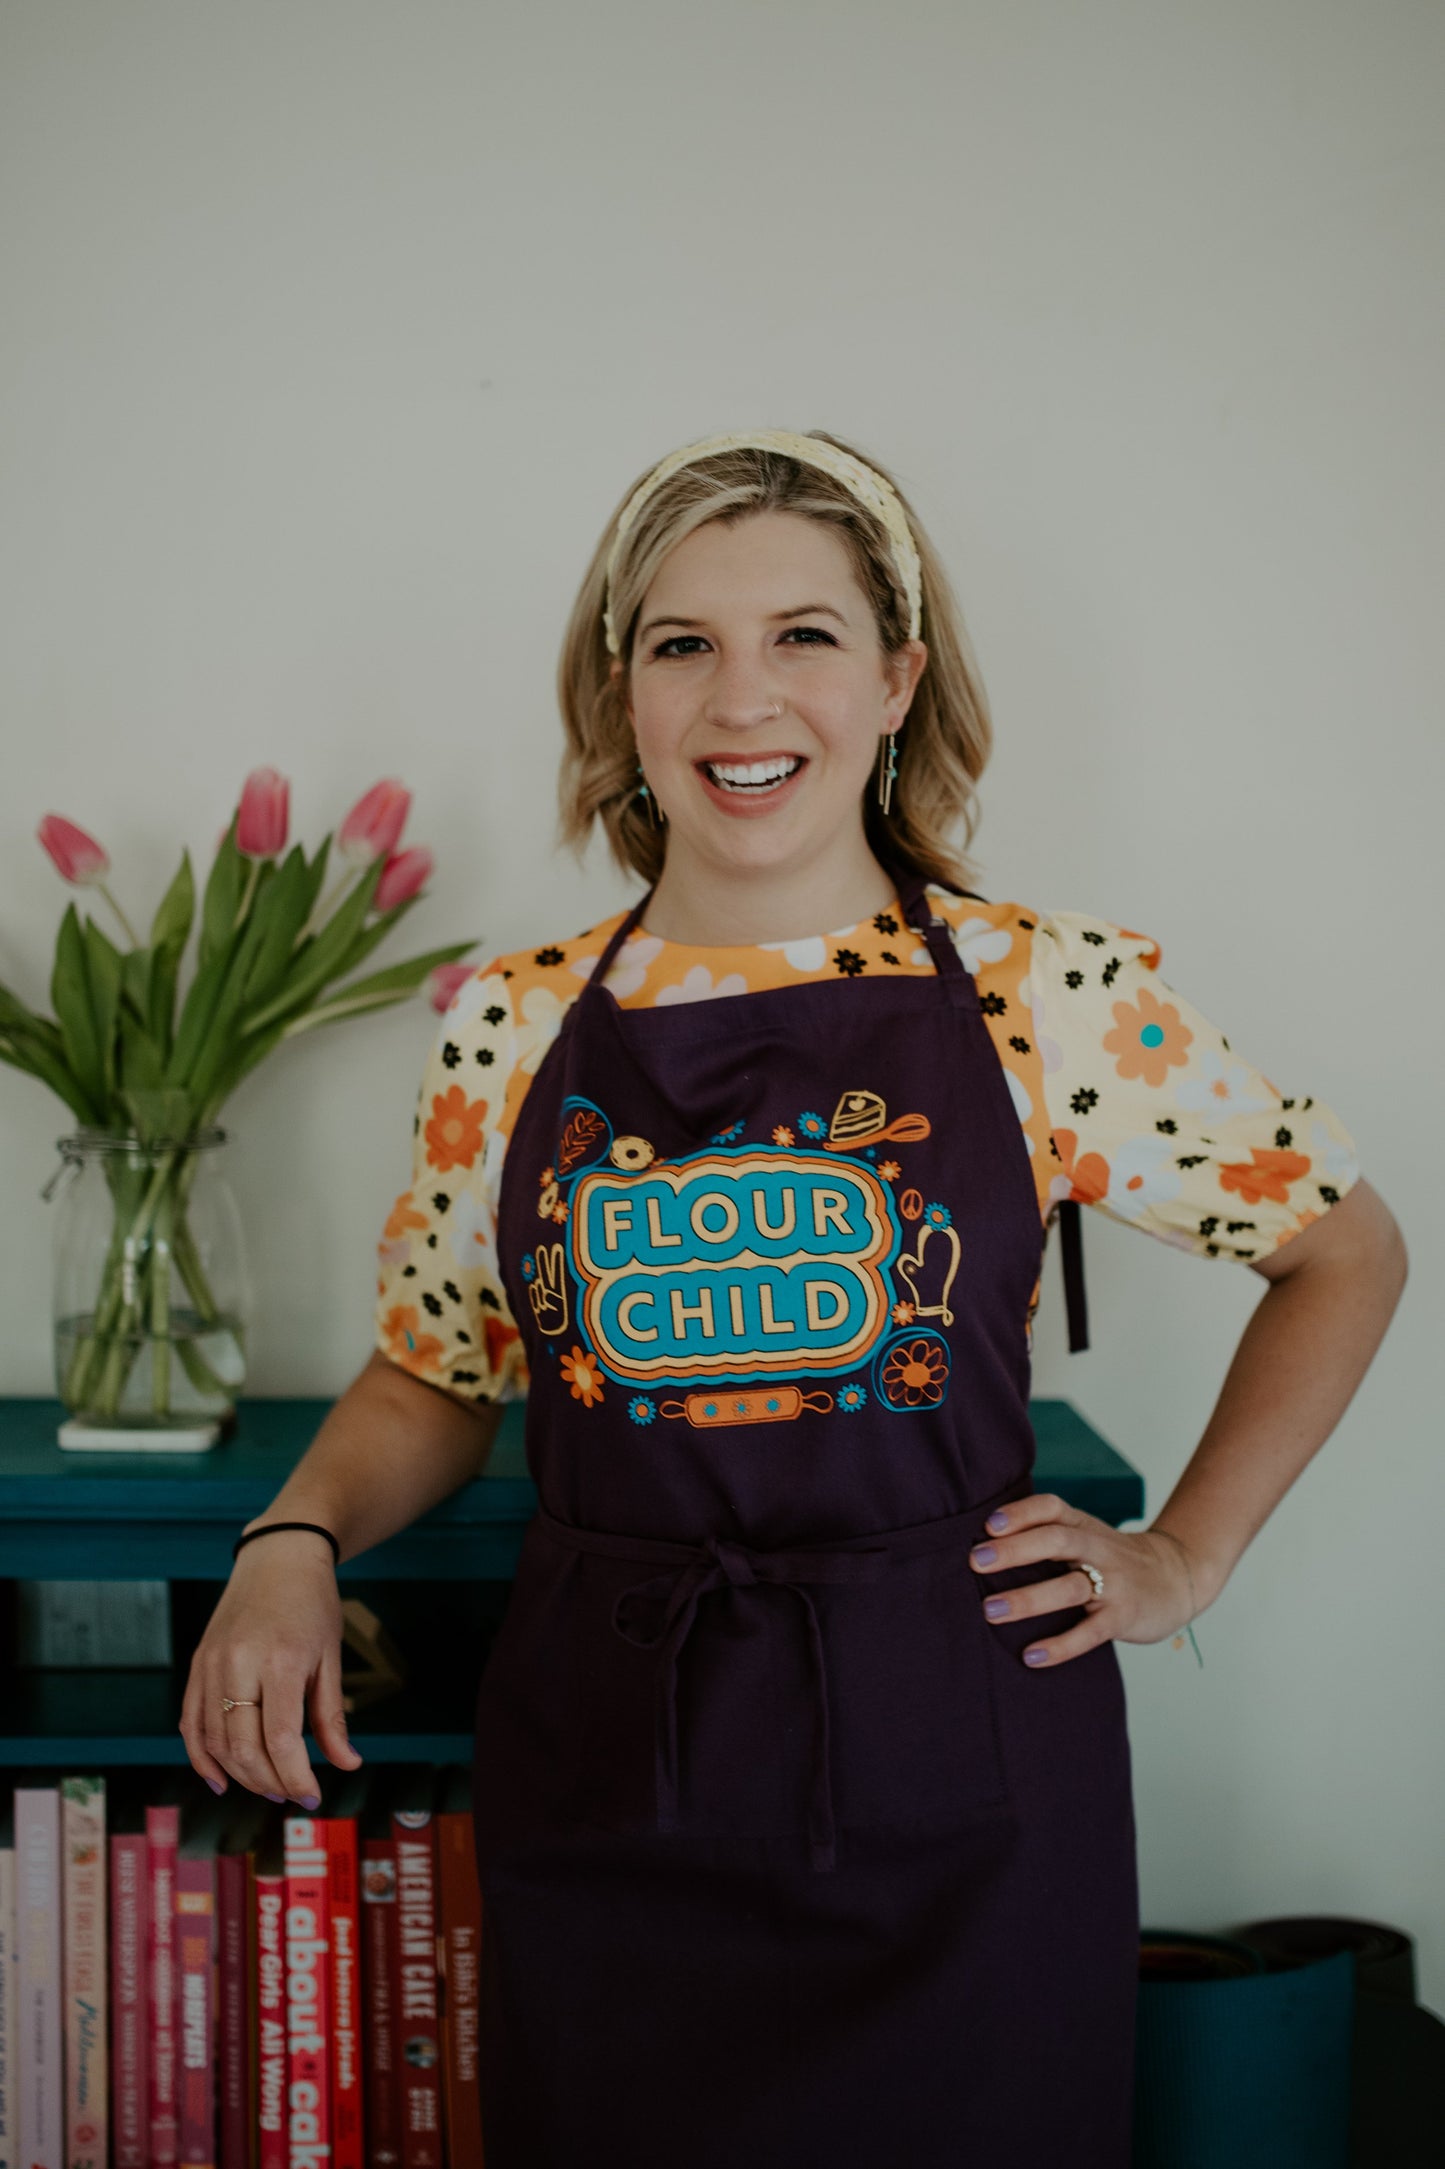 A woman wears a purple apron with the words "Flour Child" and colorful kitchen illustrations over a bright patterned top